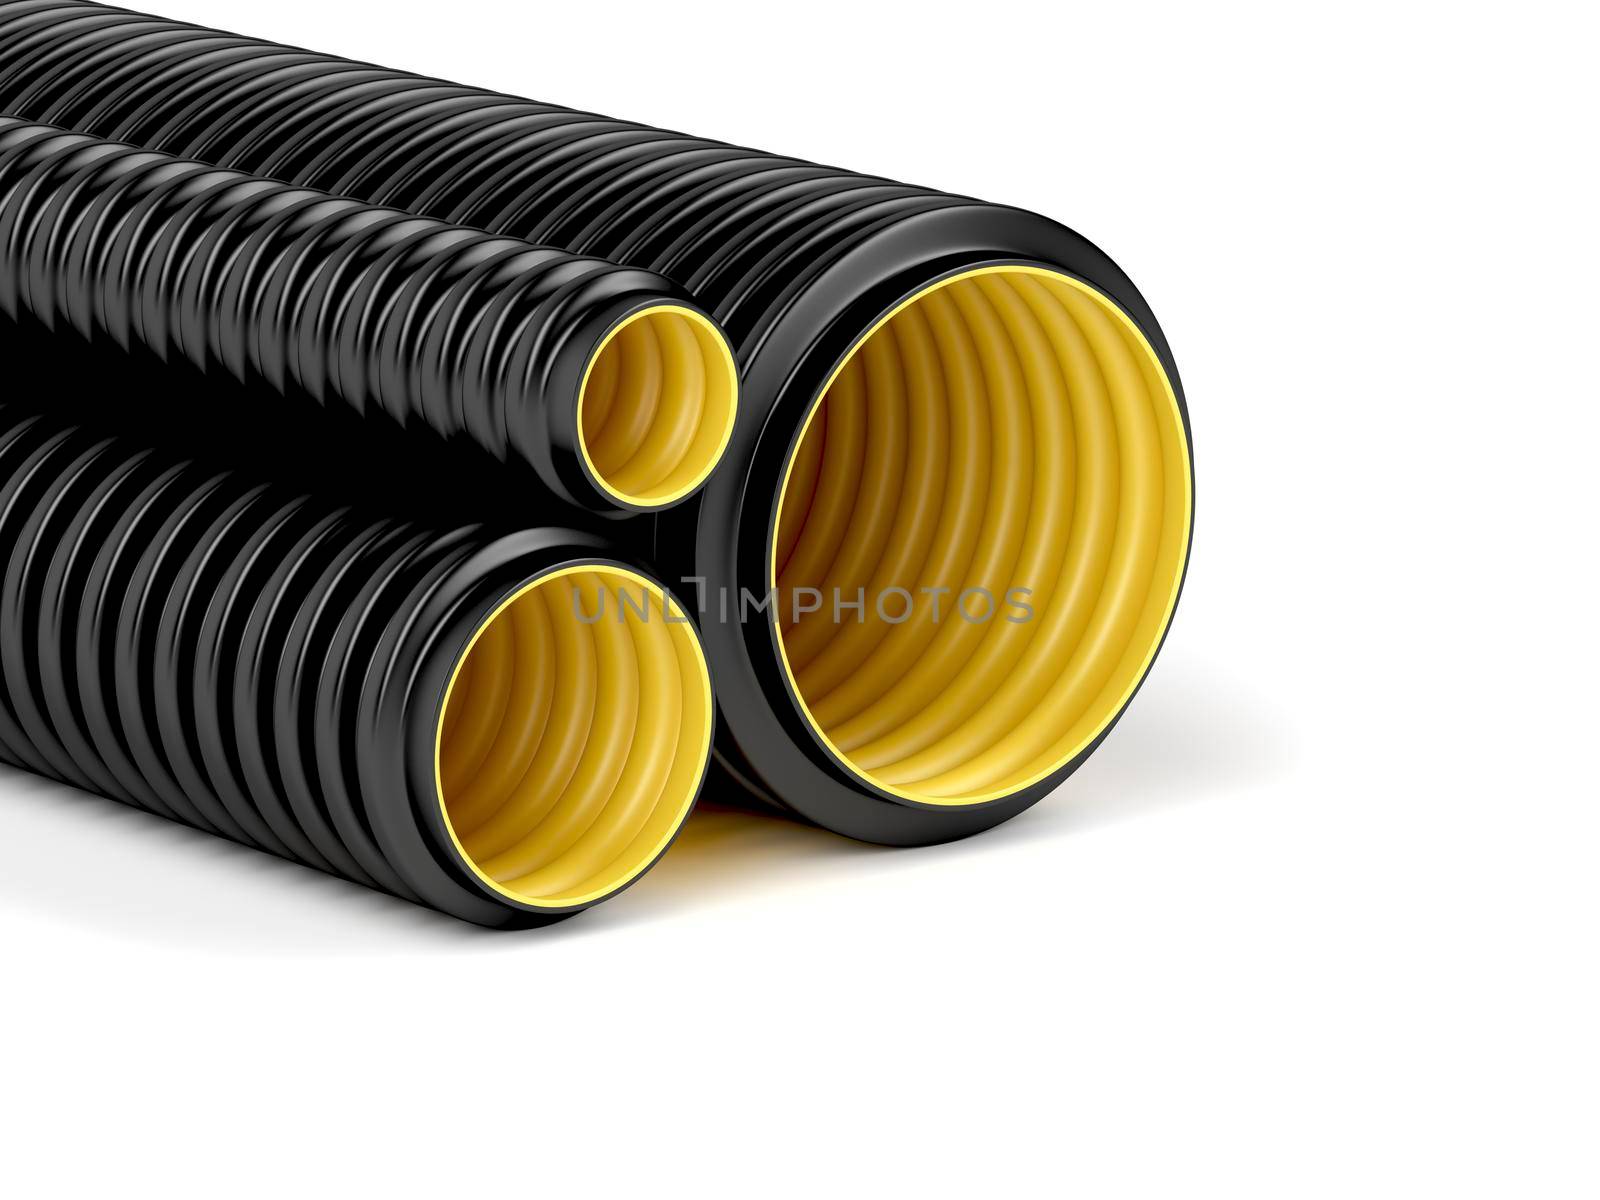 Corrugated pipes with different sizes on white background